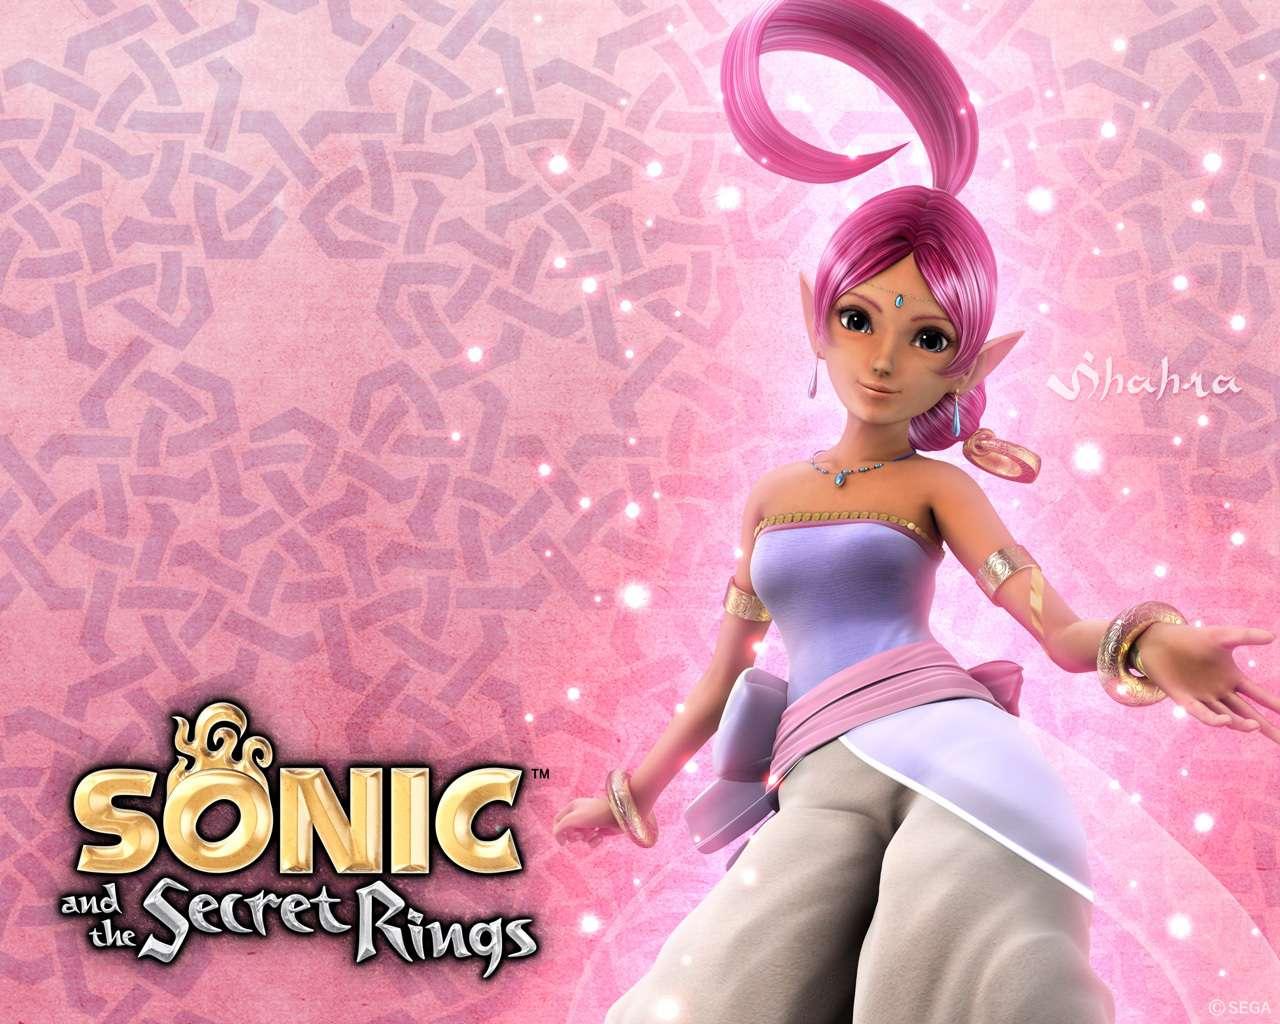 Shahra (Sonic and the Secret Rings)